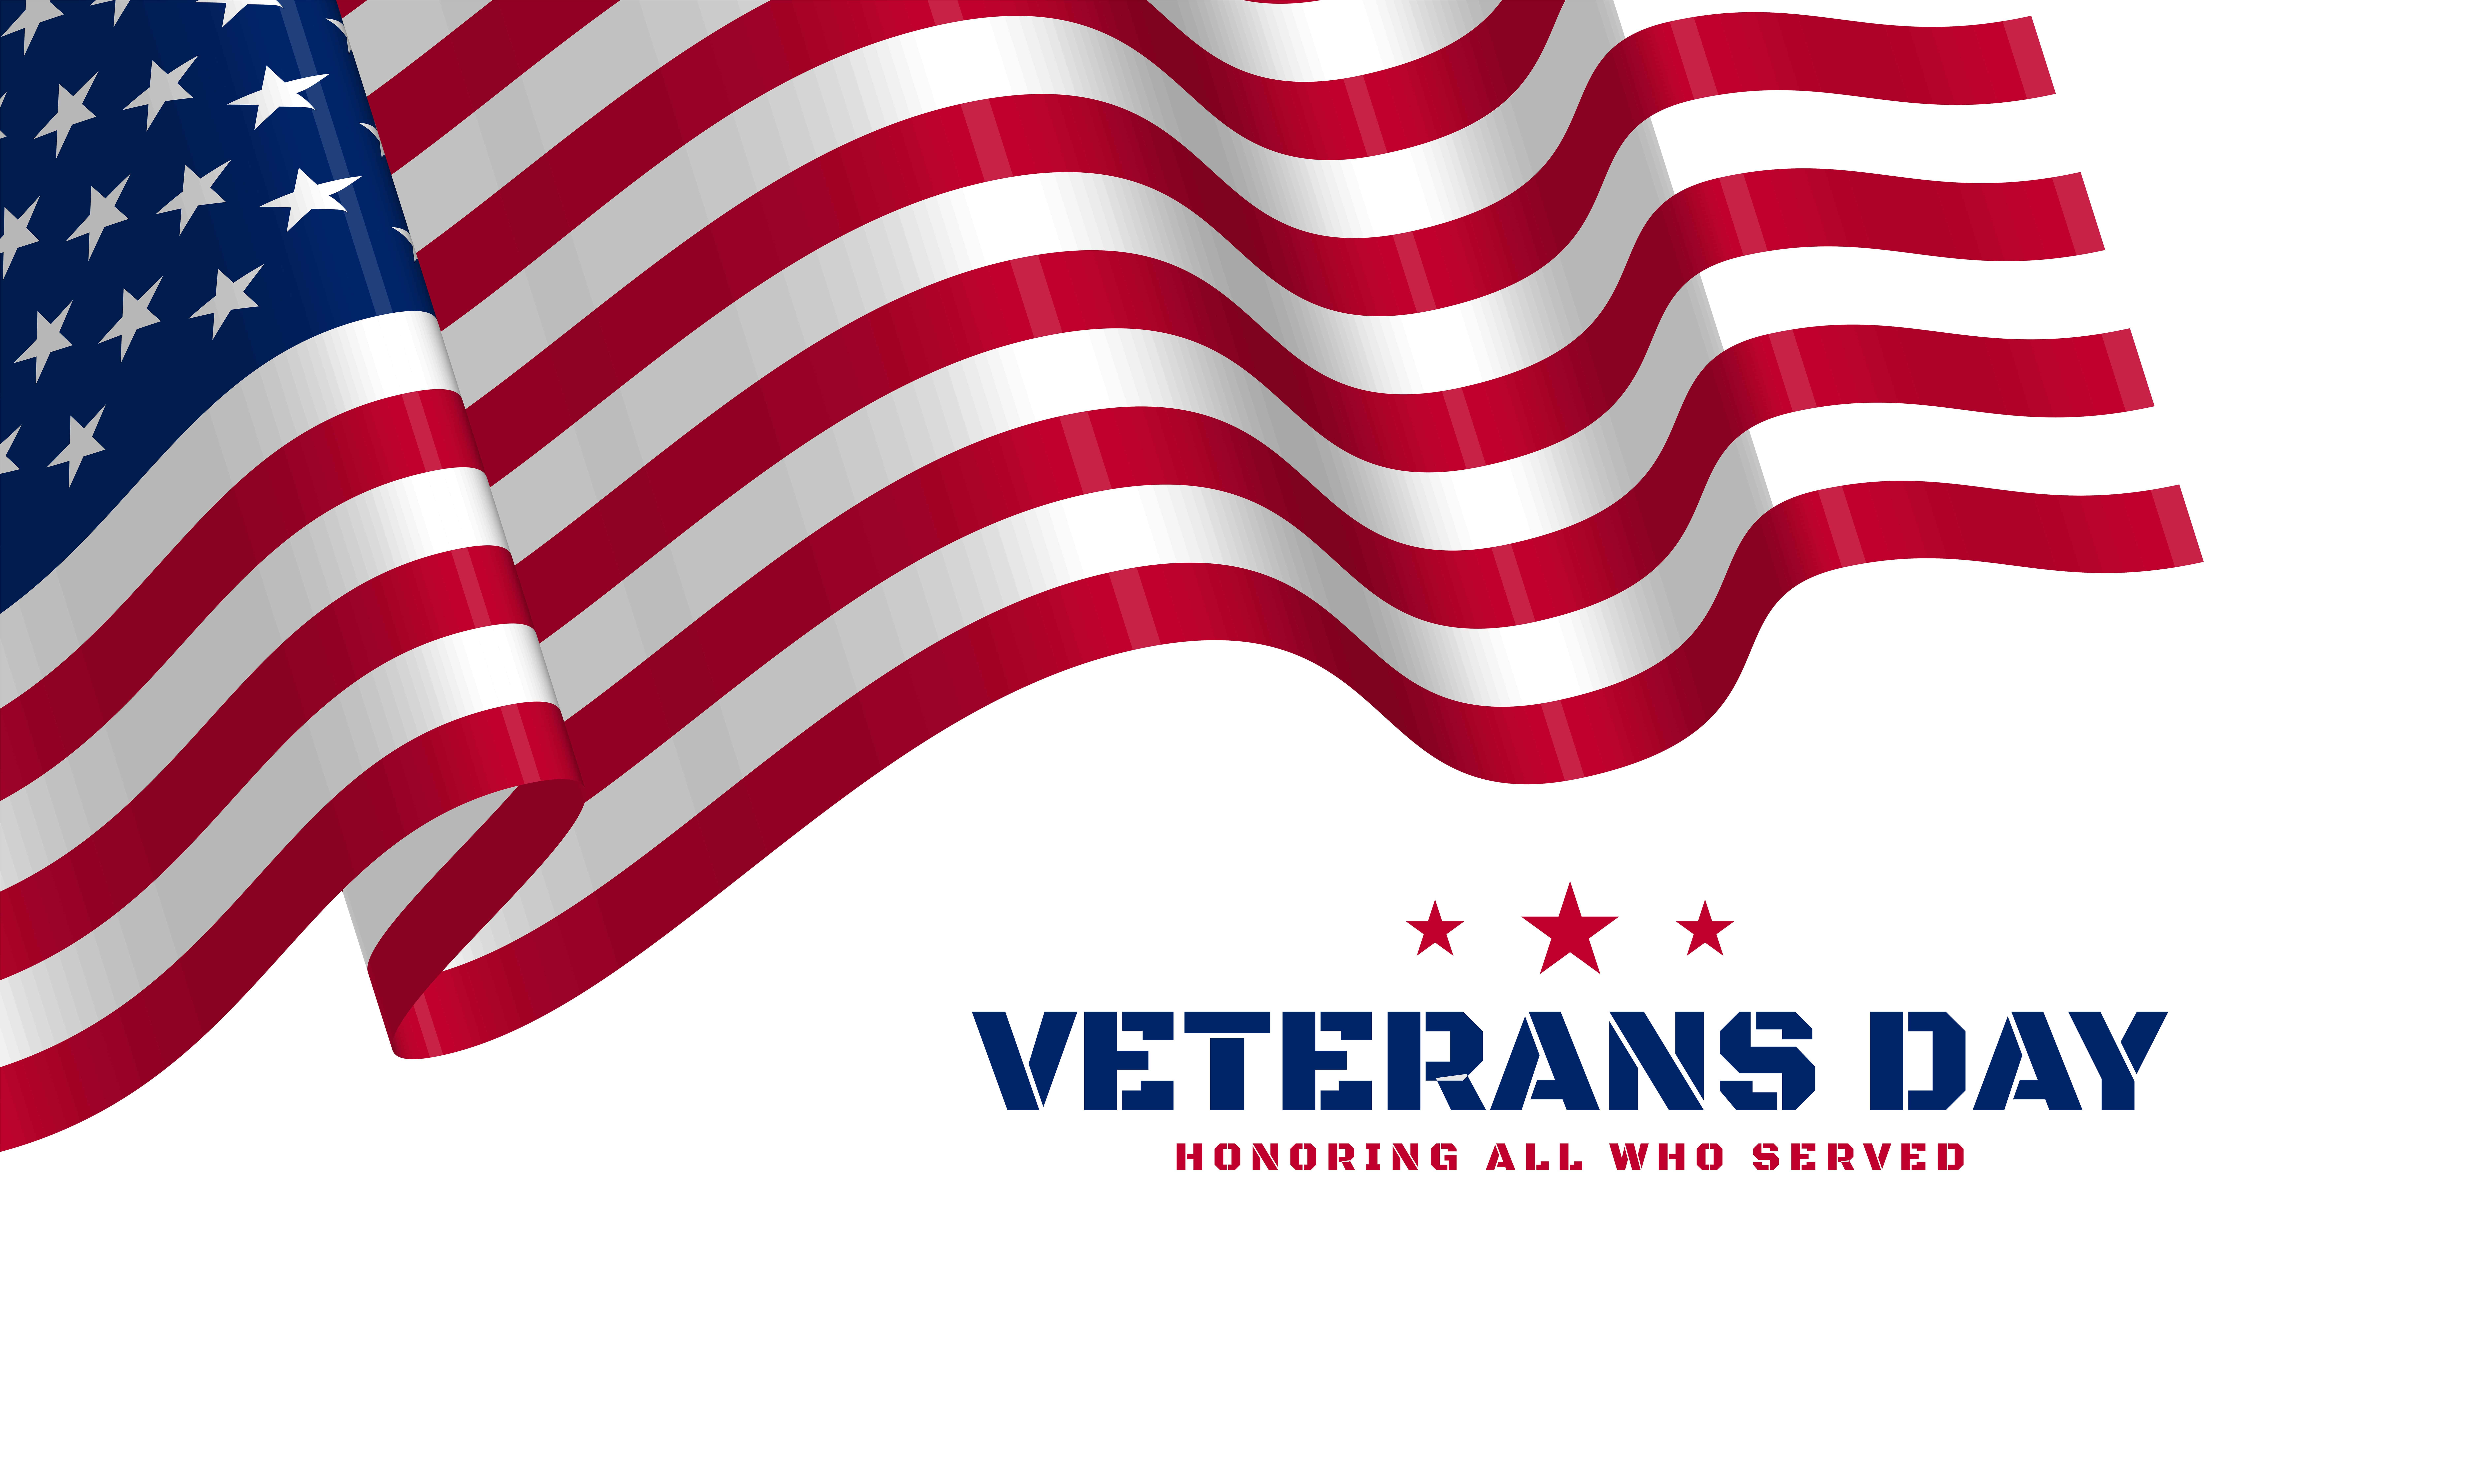 Recognizing Veterans Day – Our Veterans Share Their Stories